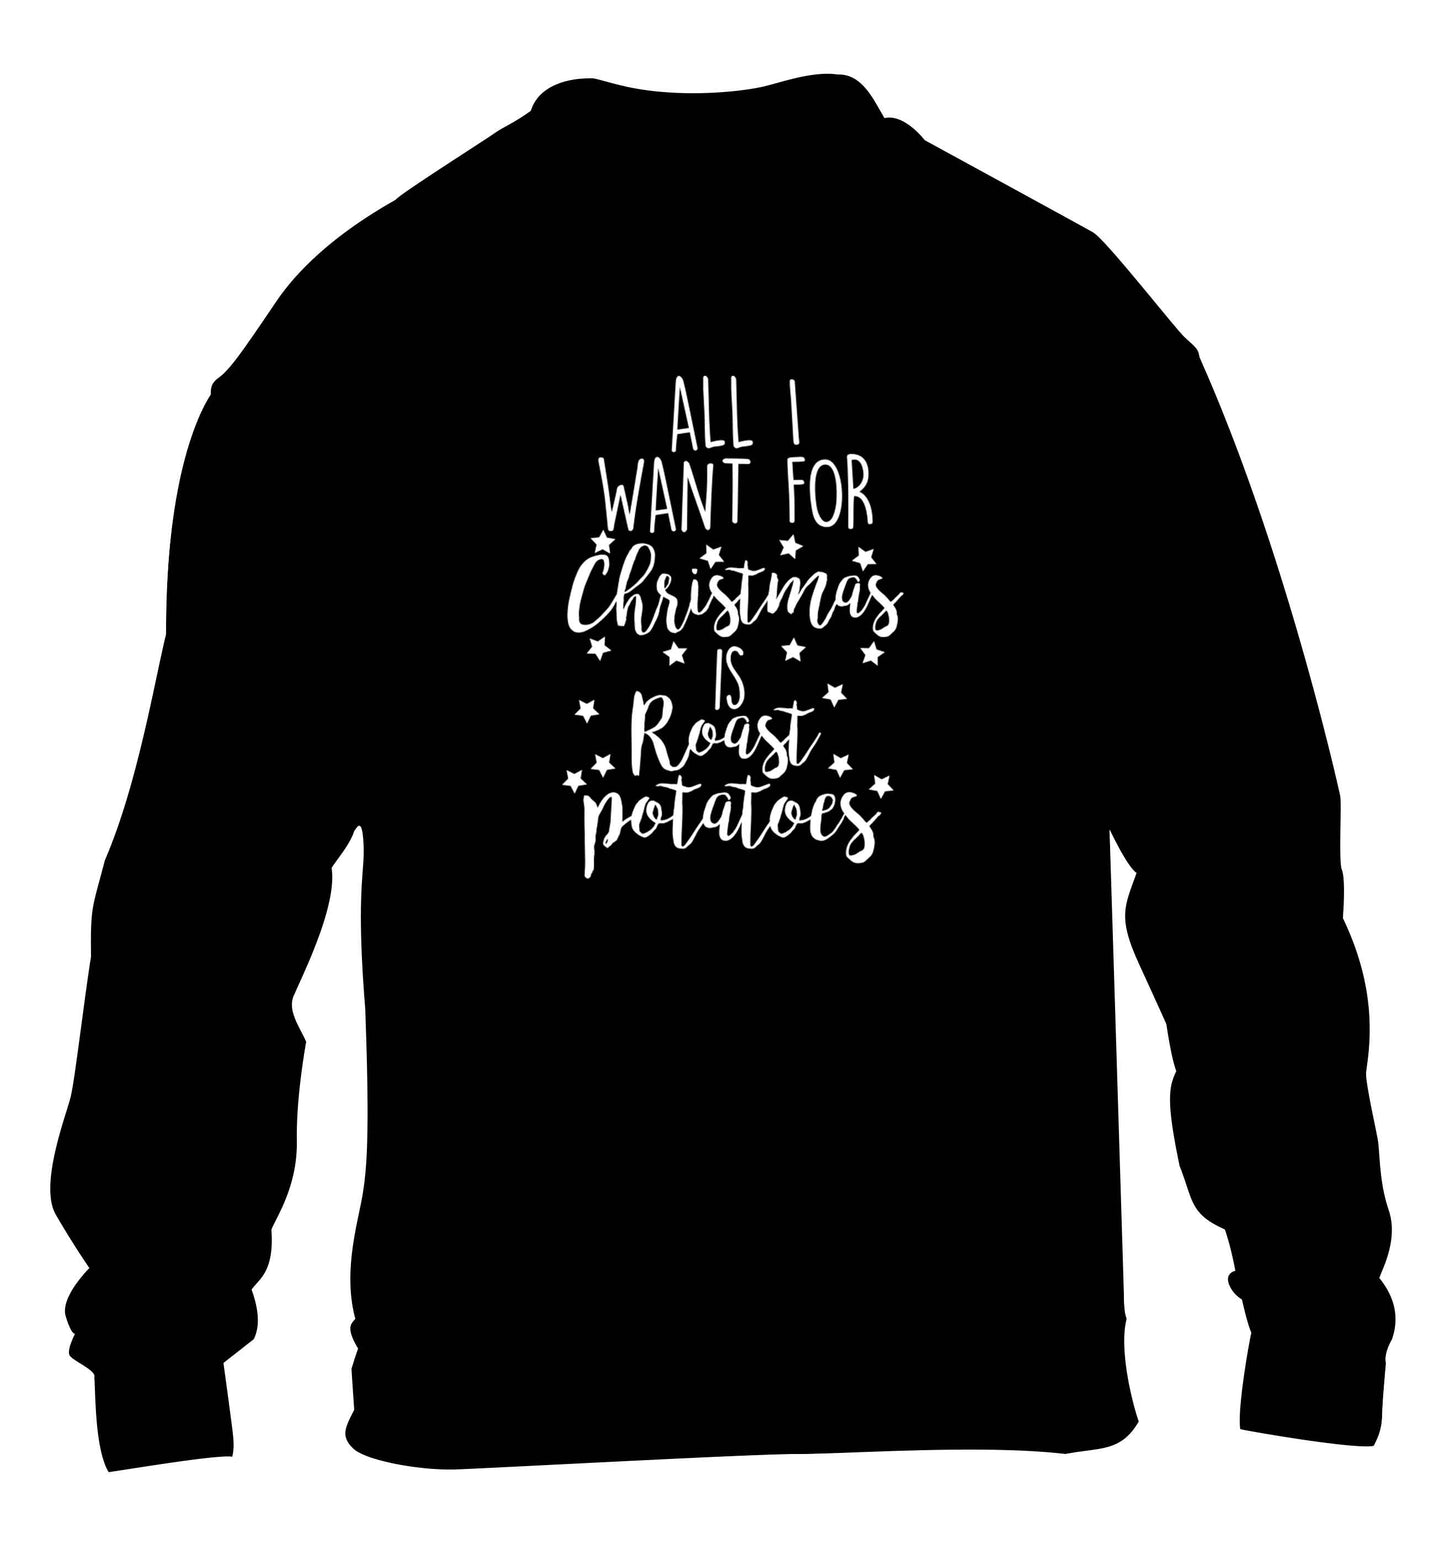 All I want for Christmas is roast potatoes children's black sweater 12-13 Years